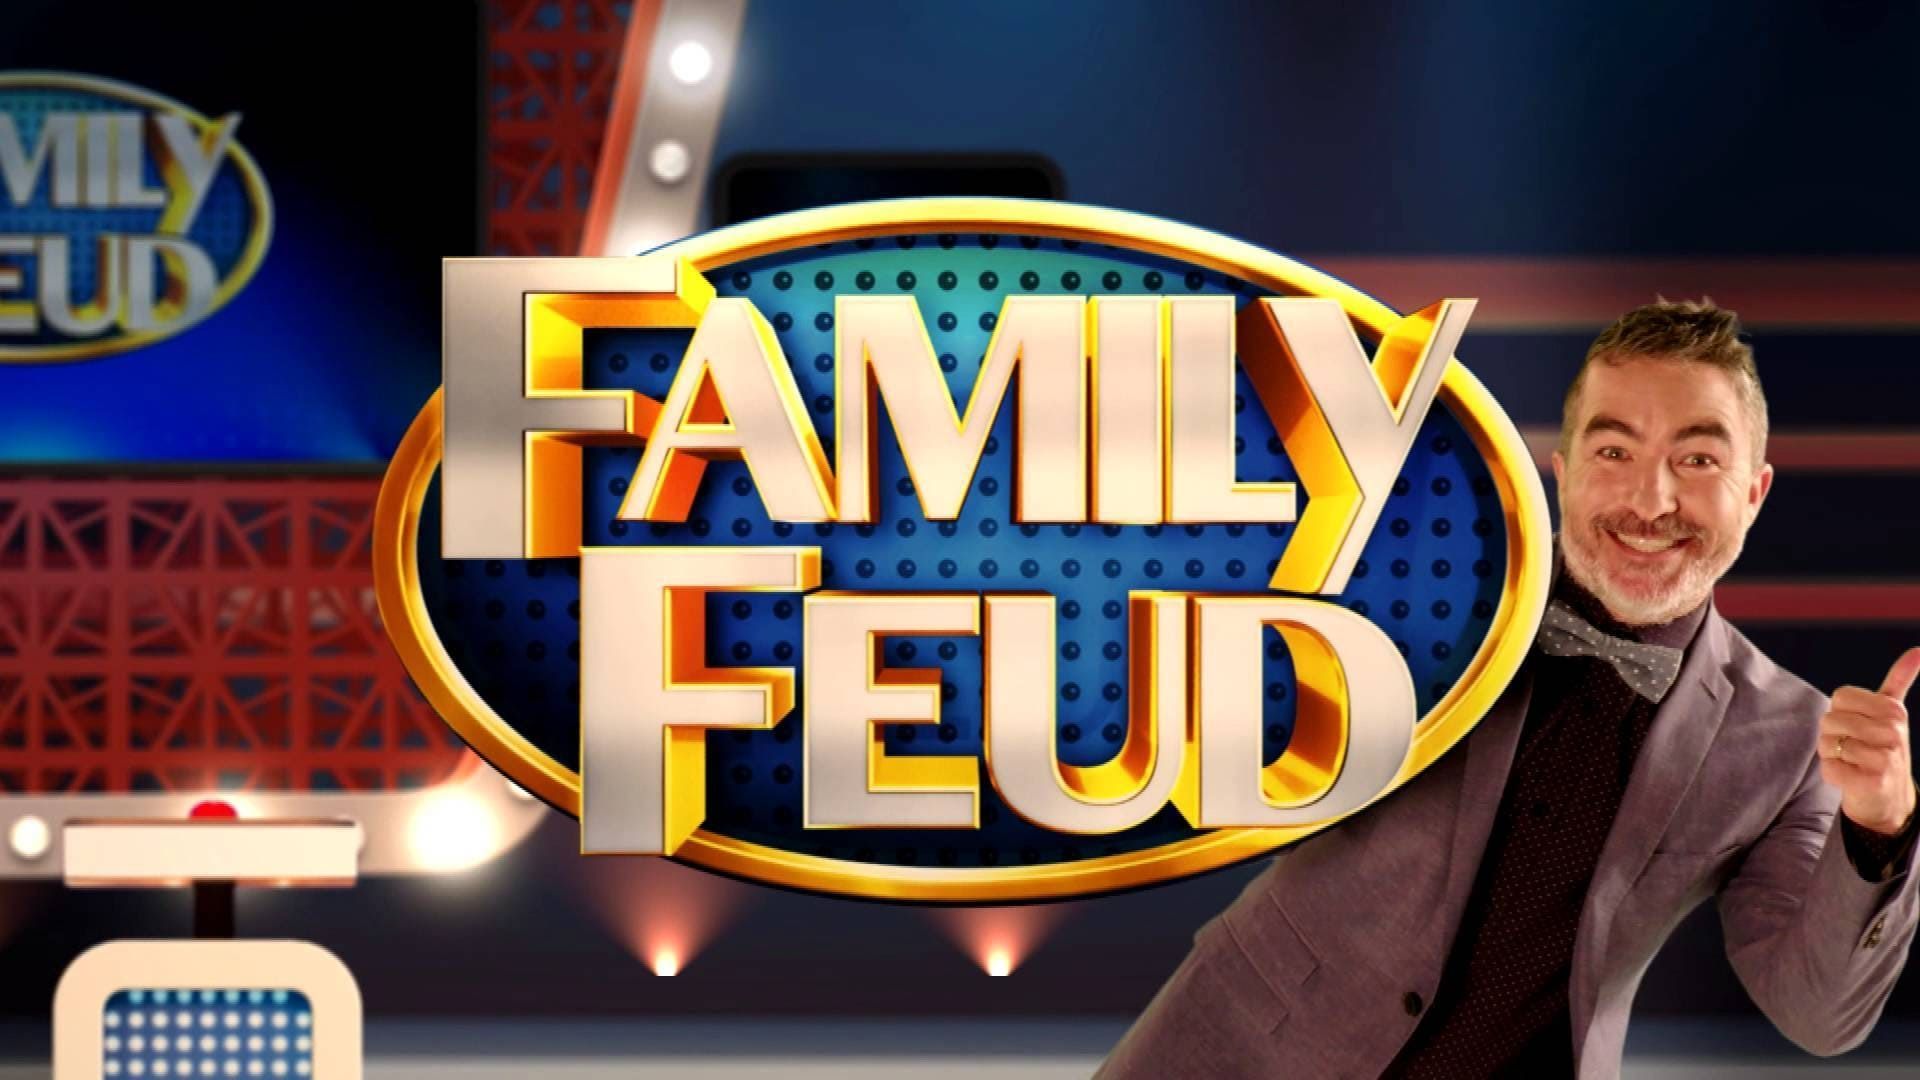 All Star Family Feud background